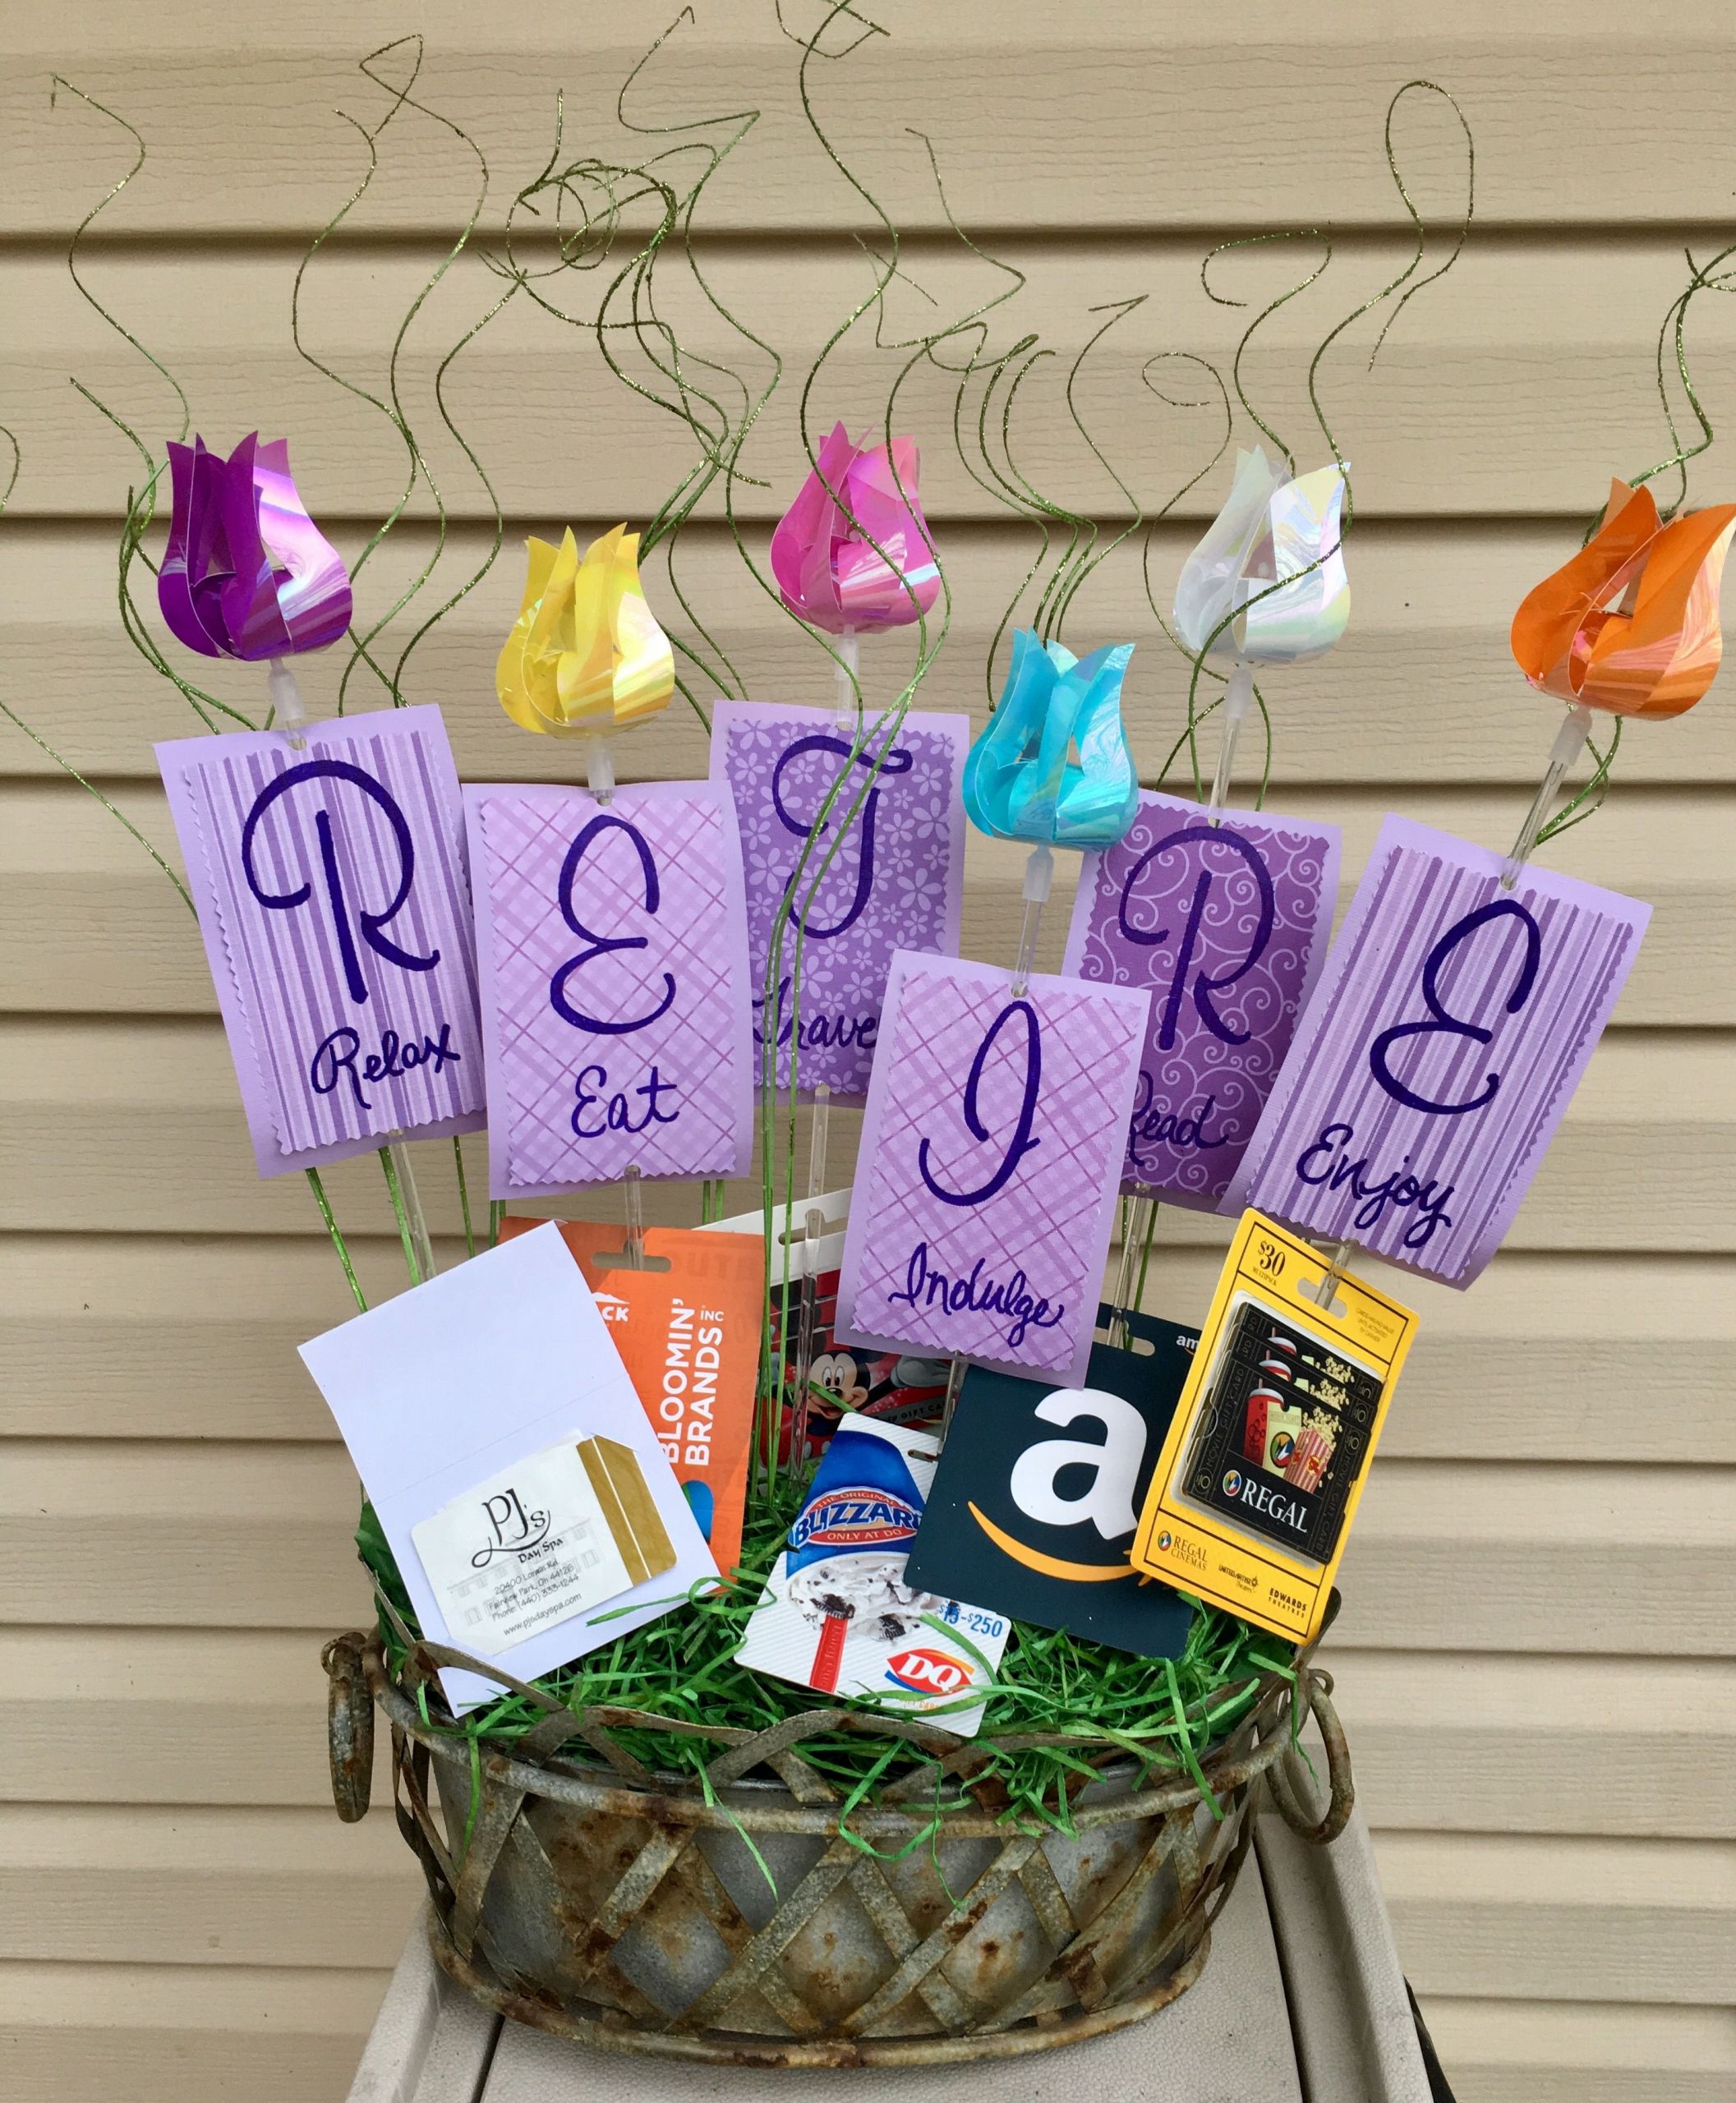 Retirement Party Ideas Pinterest
 Retirement t basket with t cards Relax Eat Travel